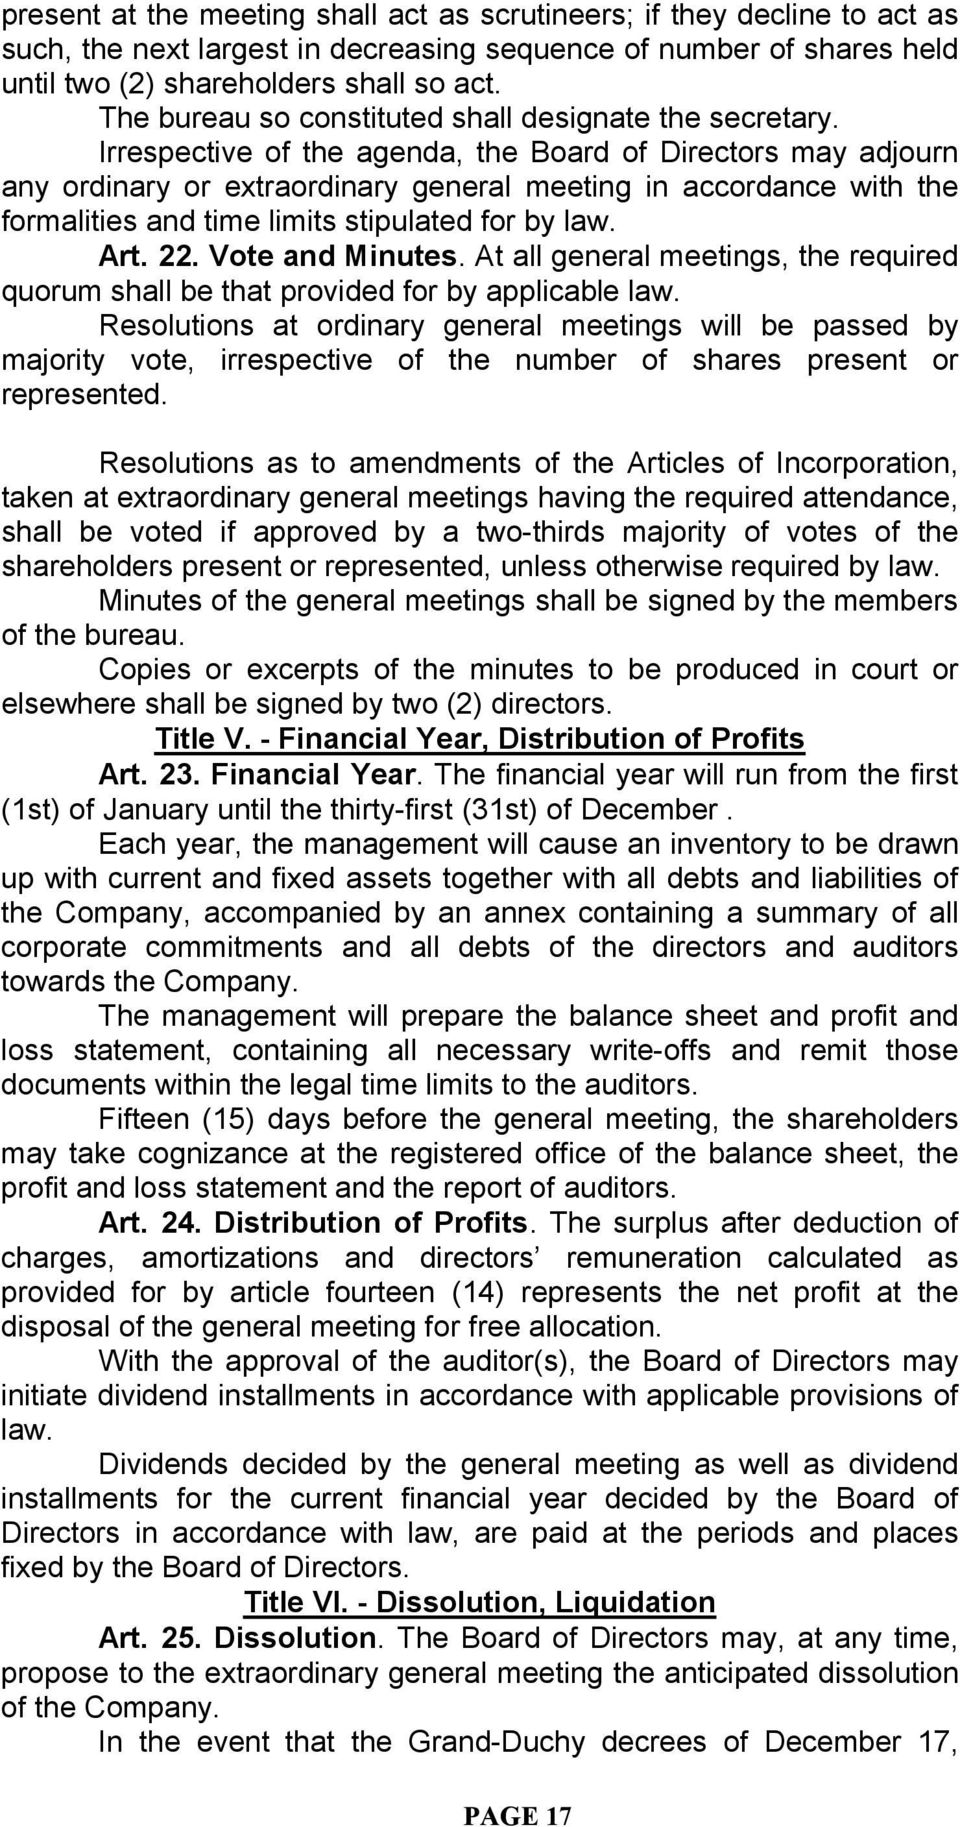 Irrespective of the agenda, the Board of Directors may adjourn any ordinary or extraordinary general meeting in accordance with the formalities and time limits stipulated for by law. Art. 22.